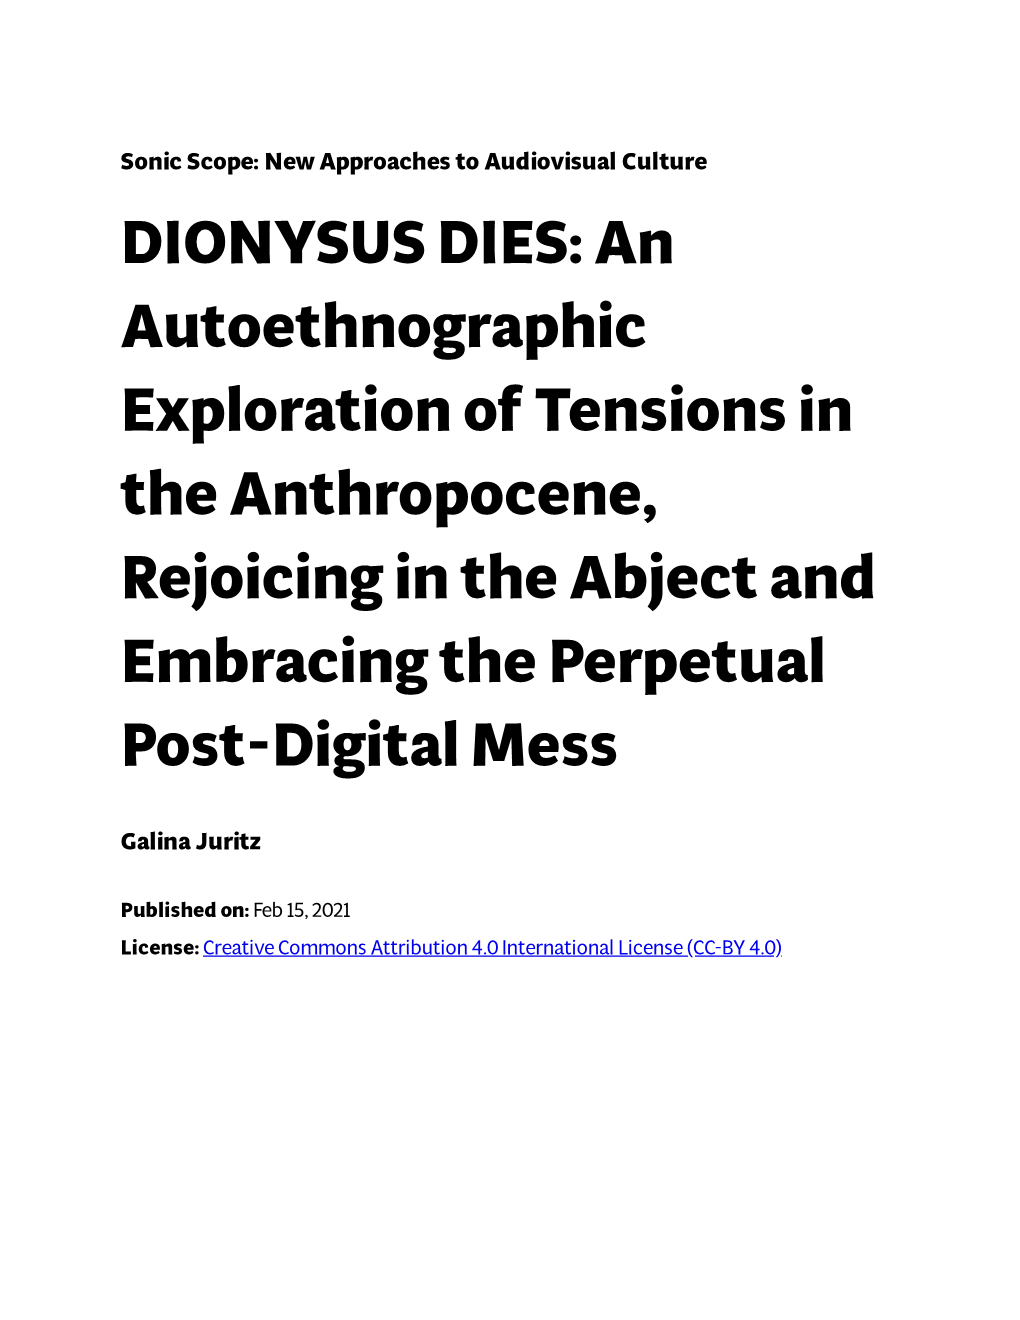 An Autoethnographic Exploration of Tensions in the Anthropocene, Rejoicing in the Abject and Embracing the Perpetual Post-Digital Mess